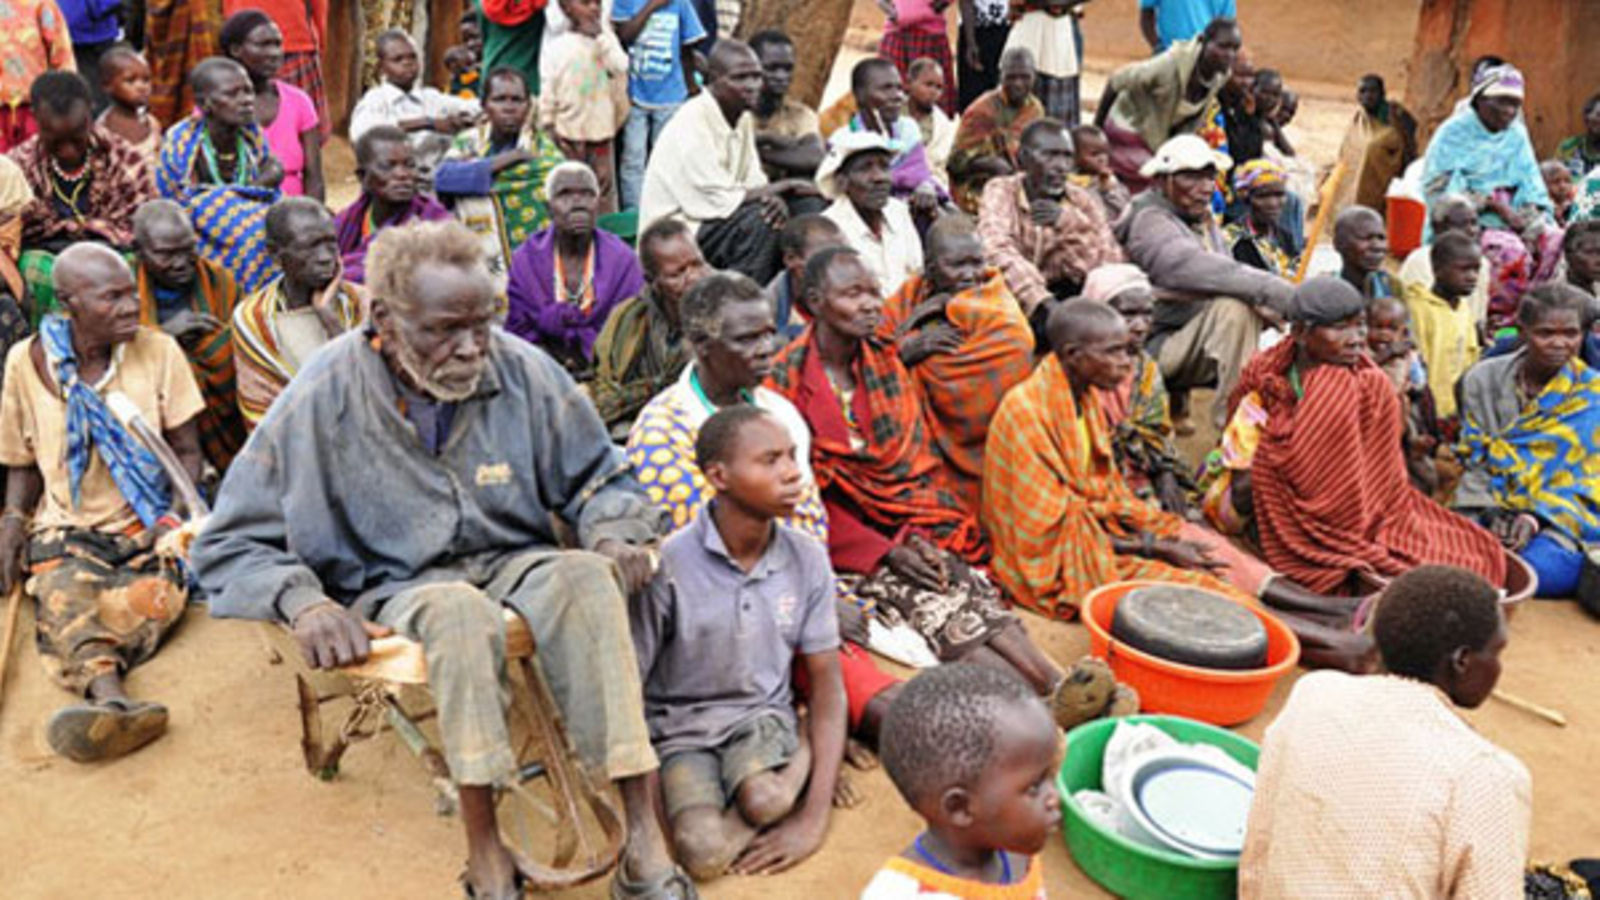 Which is the poorest tribe in uganda?